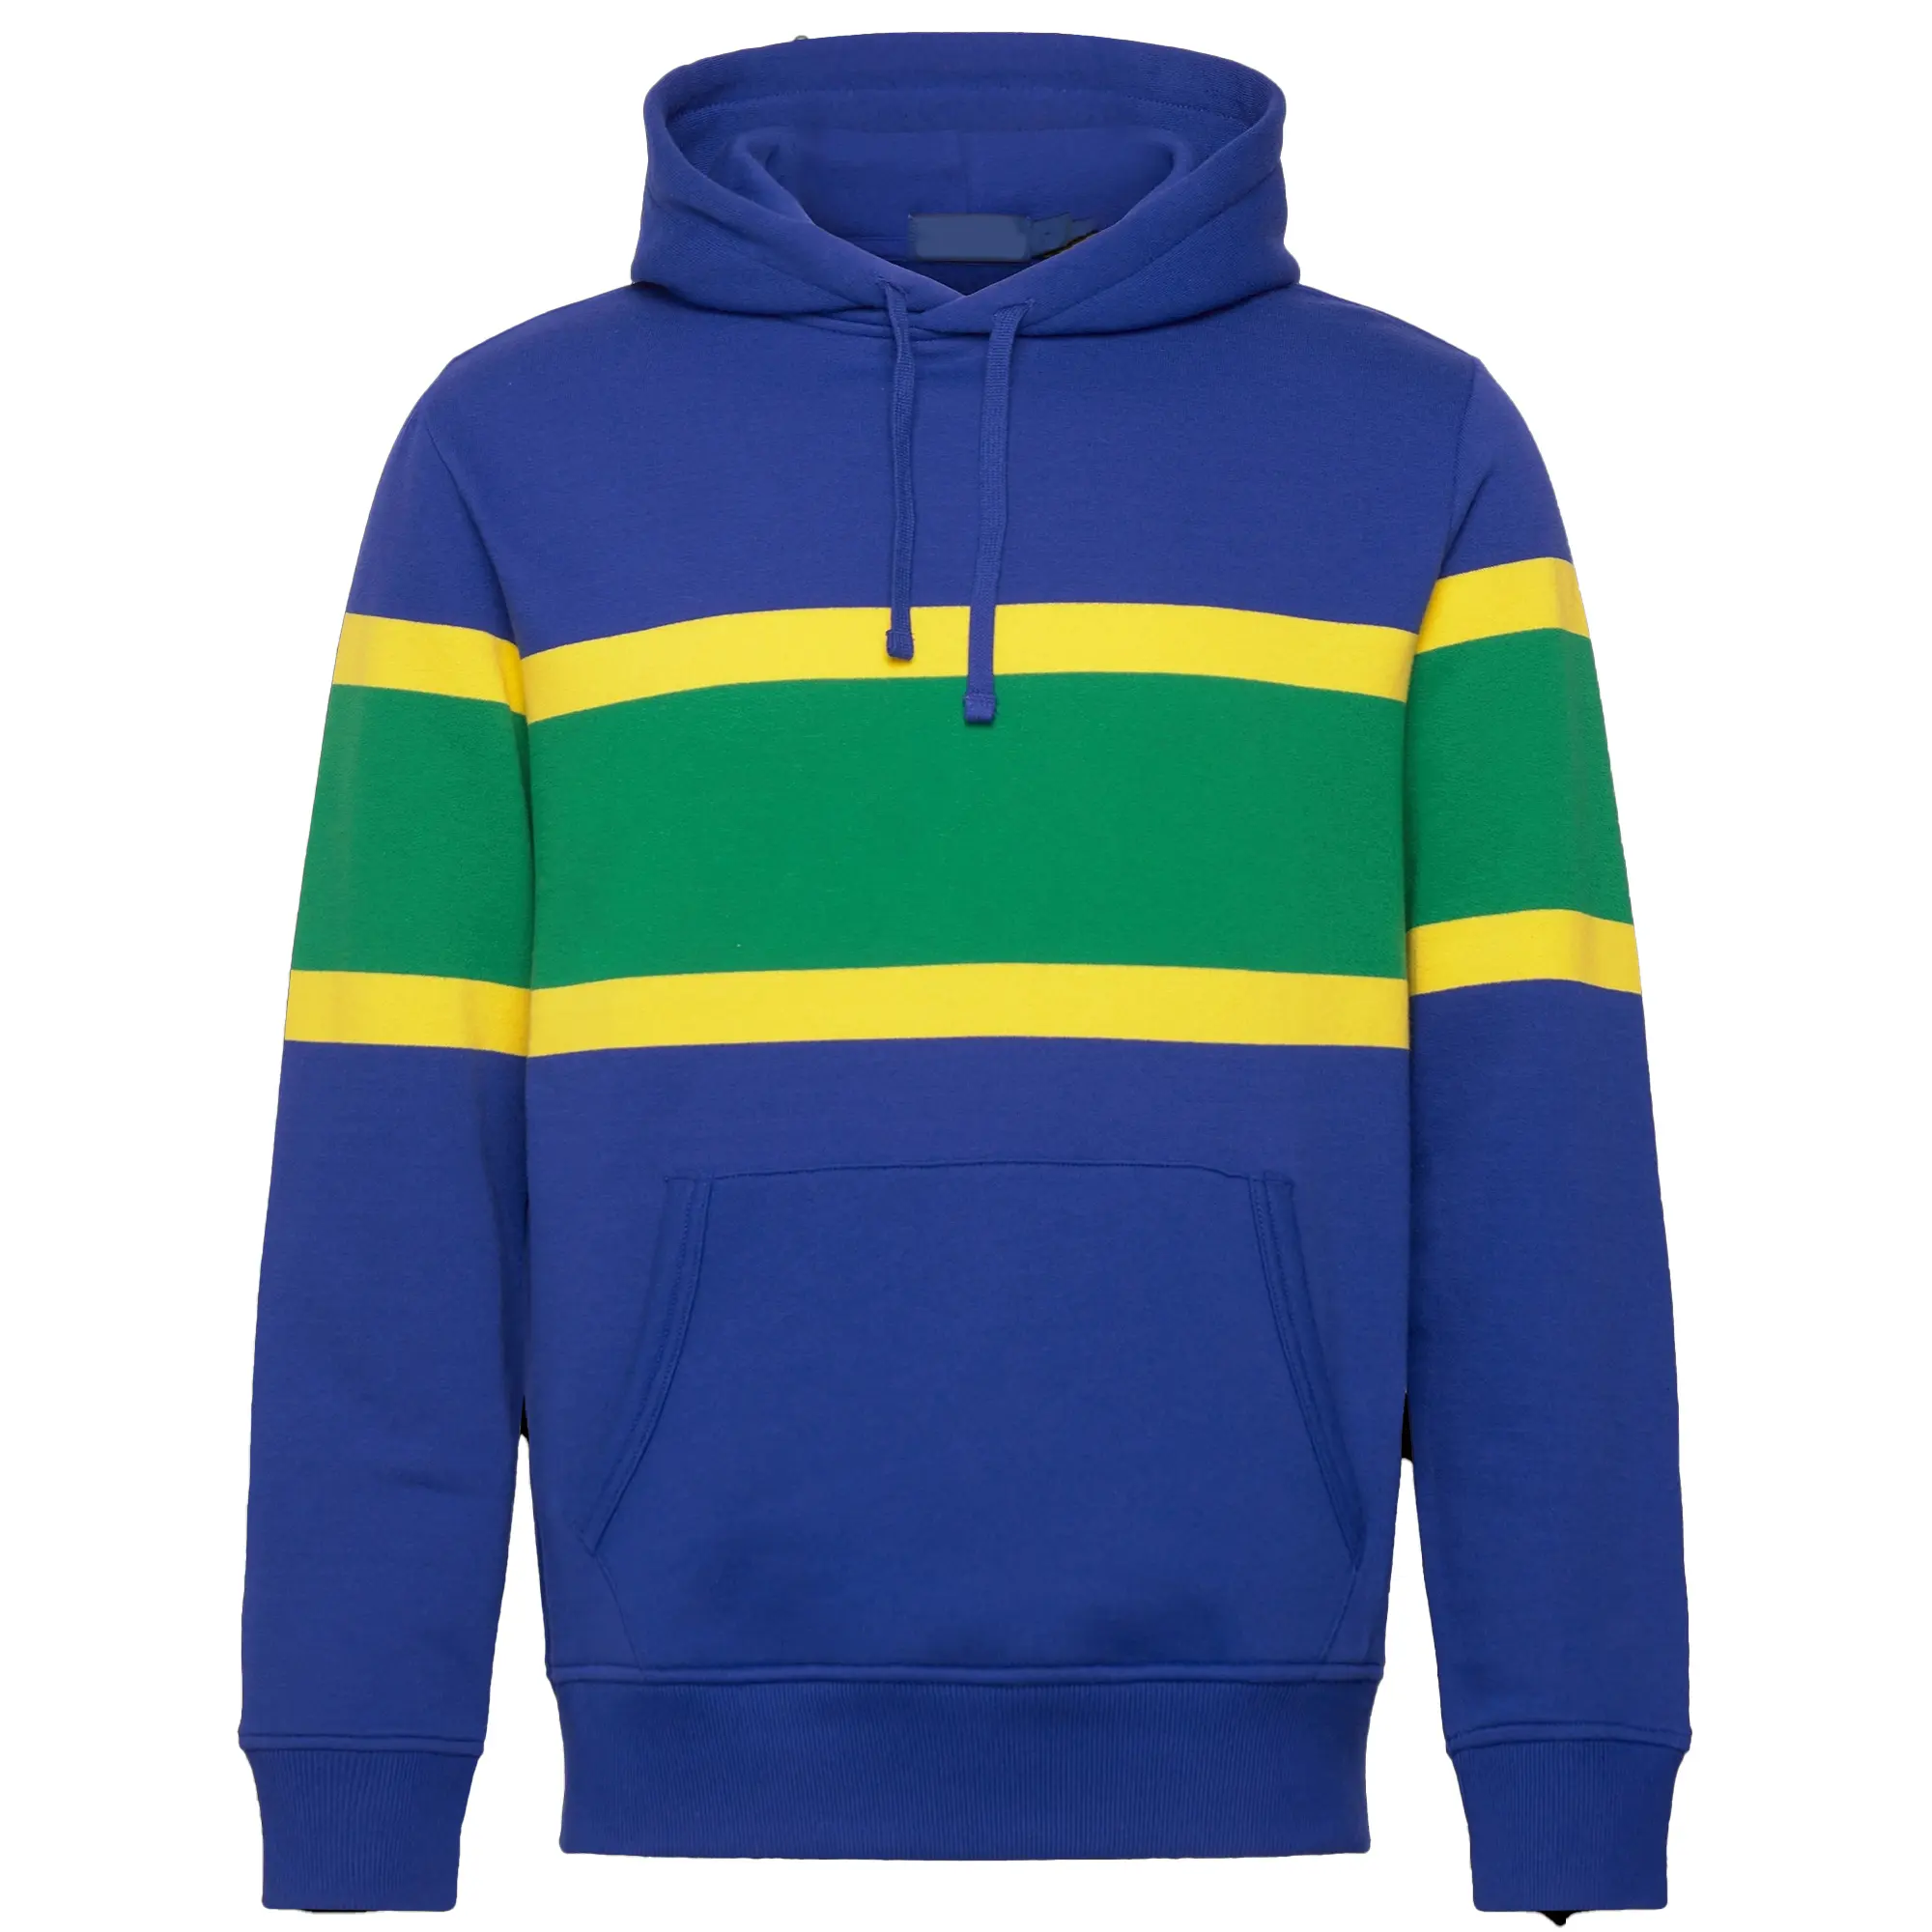 OEM Custom Made Manufacturer From Bangladesh 100% Cotton Striped Men's Pullover Hoodies & Sweatshirts With High Quality Fabric